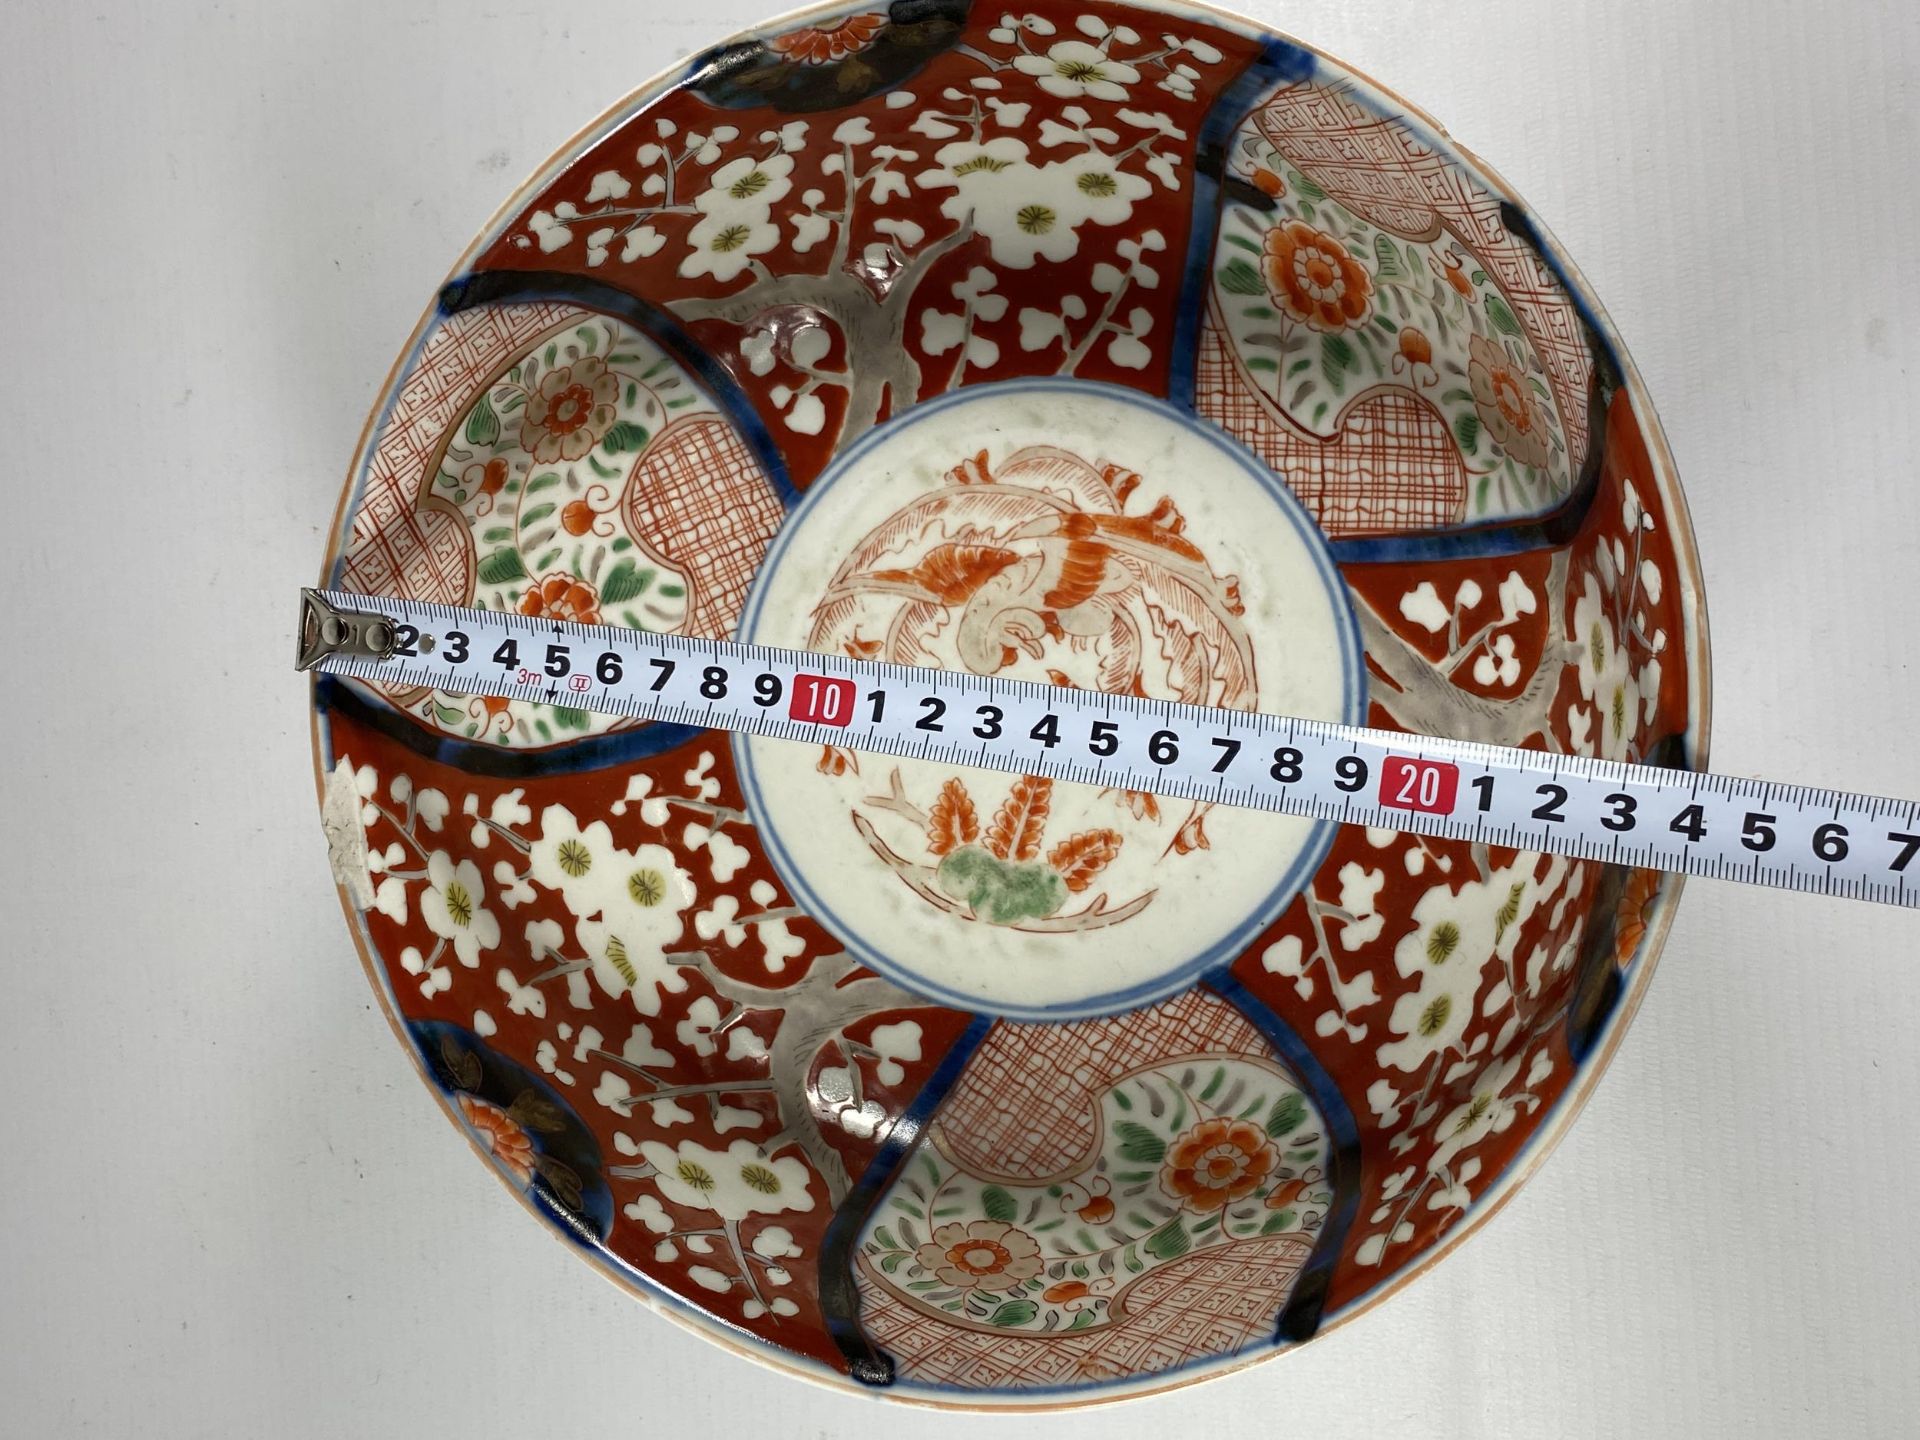 A LARGE JAPANESE MEIJI PERIOD (1868-1912) IMARI FRUIT BOWL WITH RED ENAMELLED FLORAL DESIGN, - Image 8 of 8